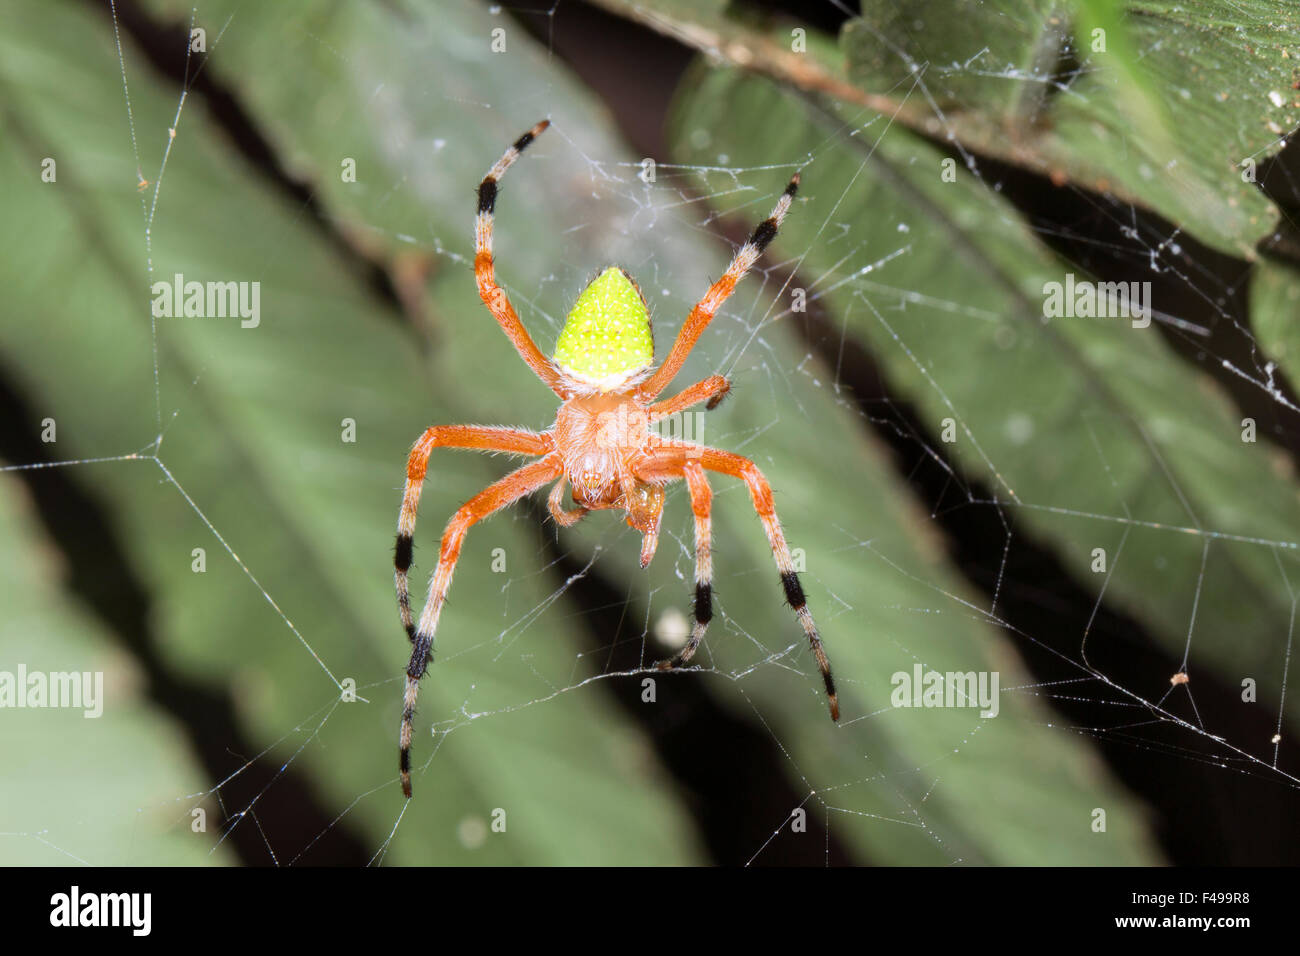 Brightly coloured spider in a web in the rainforest, Ecuador Stock Photo